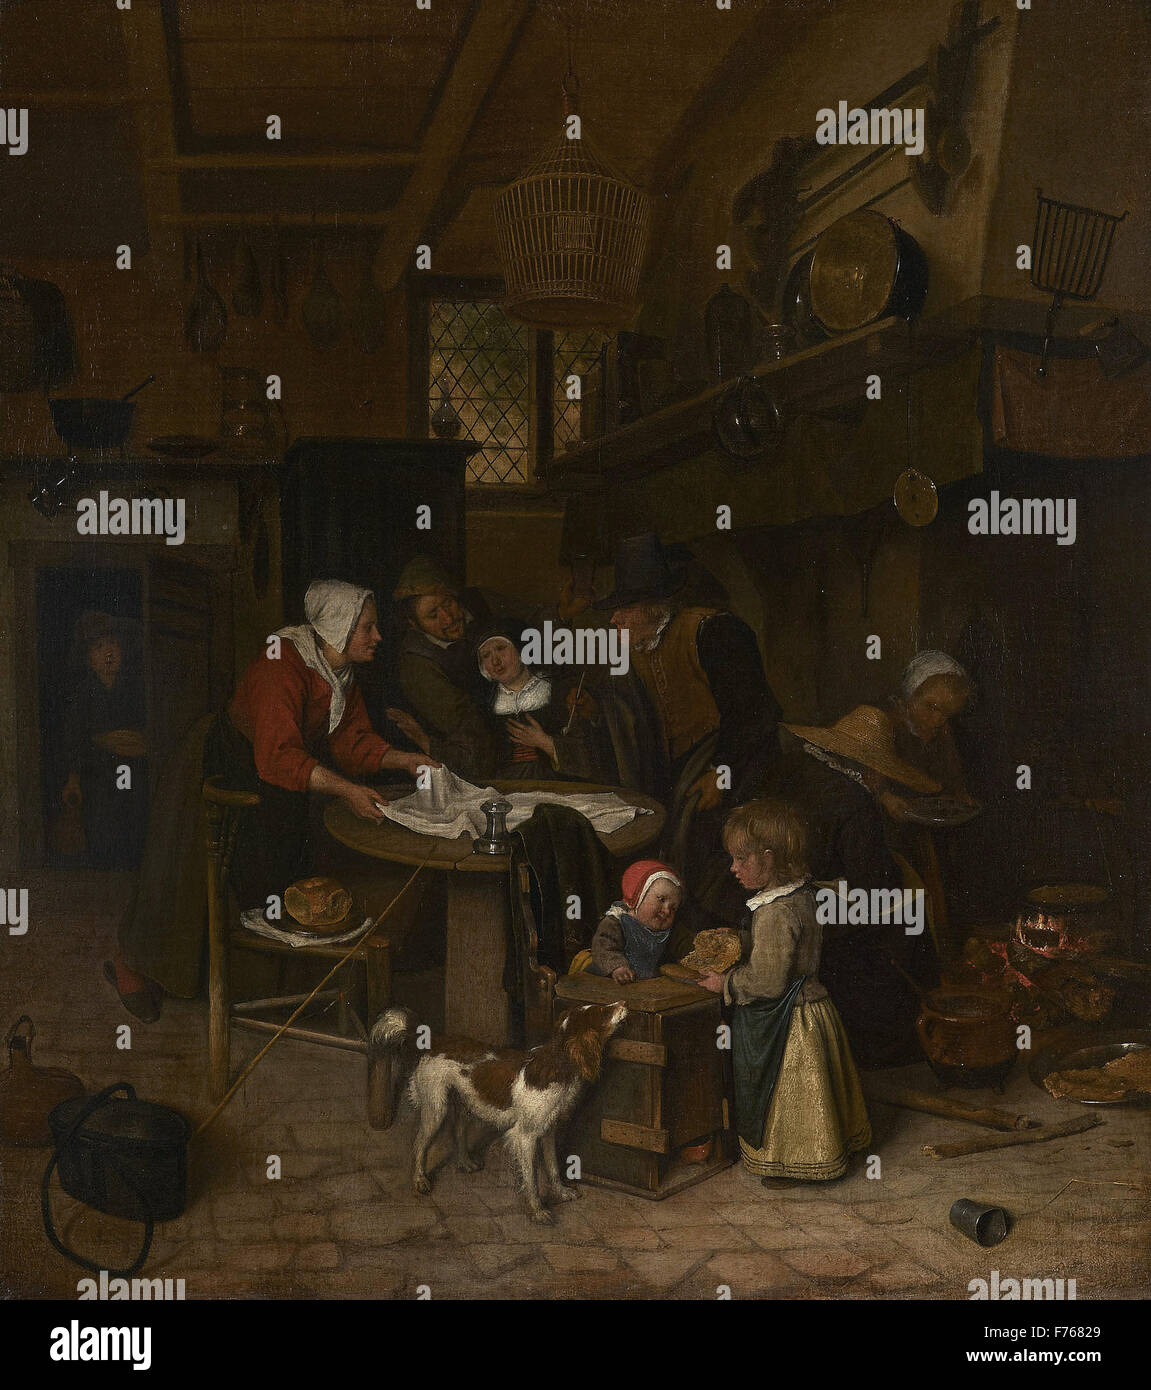 https://c8.alamy.com/comp/F76829/jan-steen-a-scene-in-a-peasant-kitchen-with-a-servant-laying-the-cloth-F76829.jpg